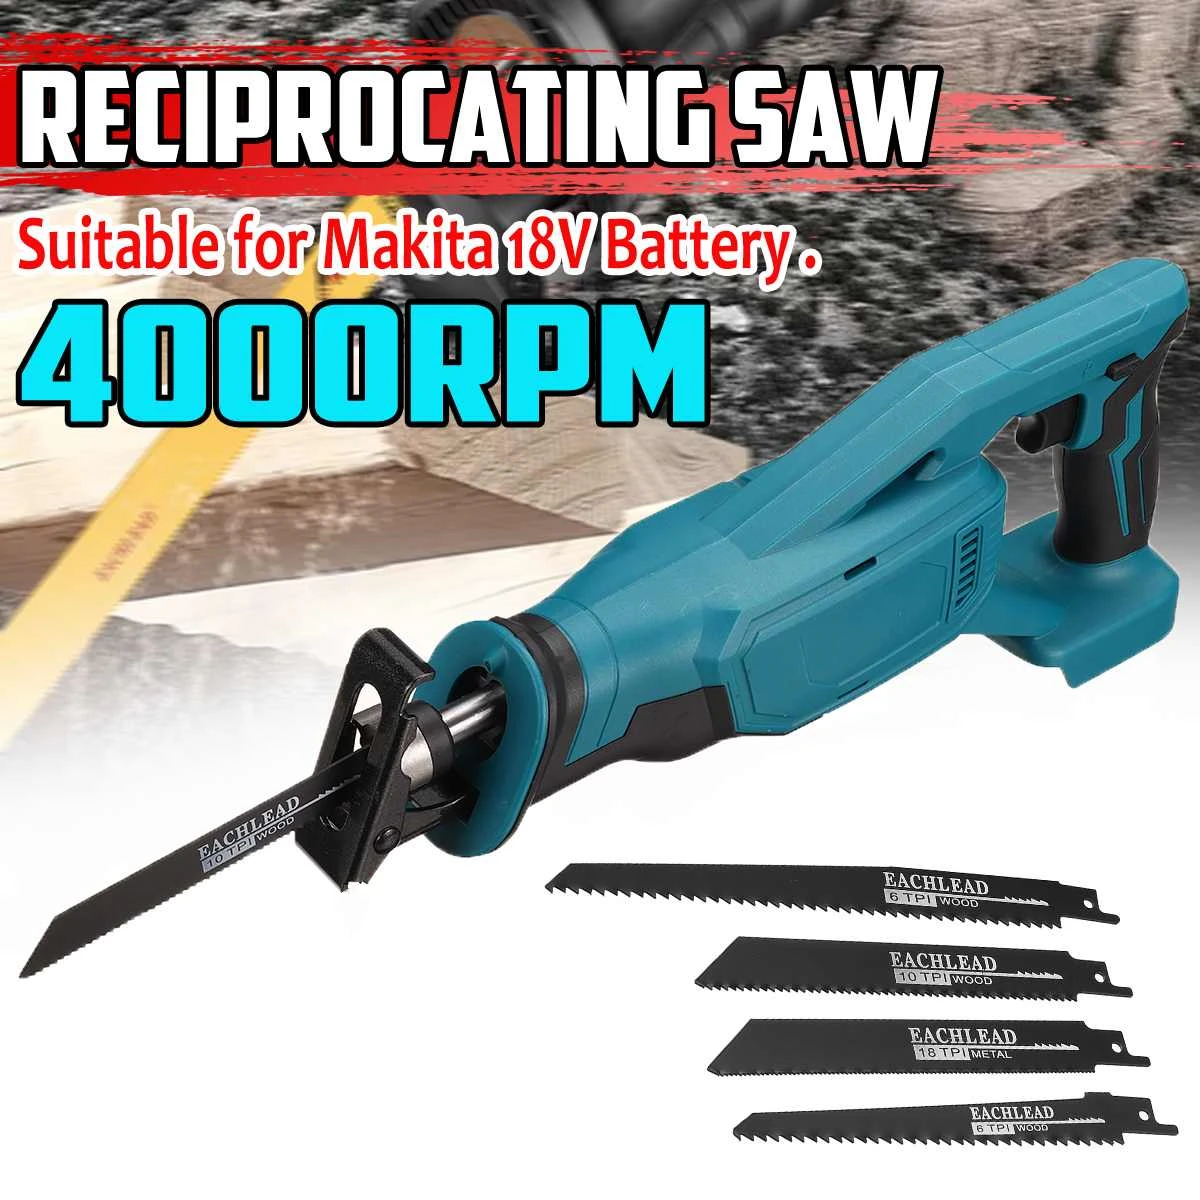 18V Electric Saw Machine Lithium Battery Rechargeable Saber Saw Reciprocating Saw Portable Logging Saw for Makita Battery 18V